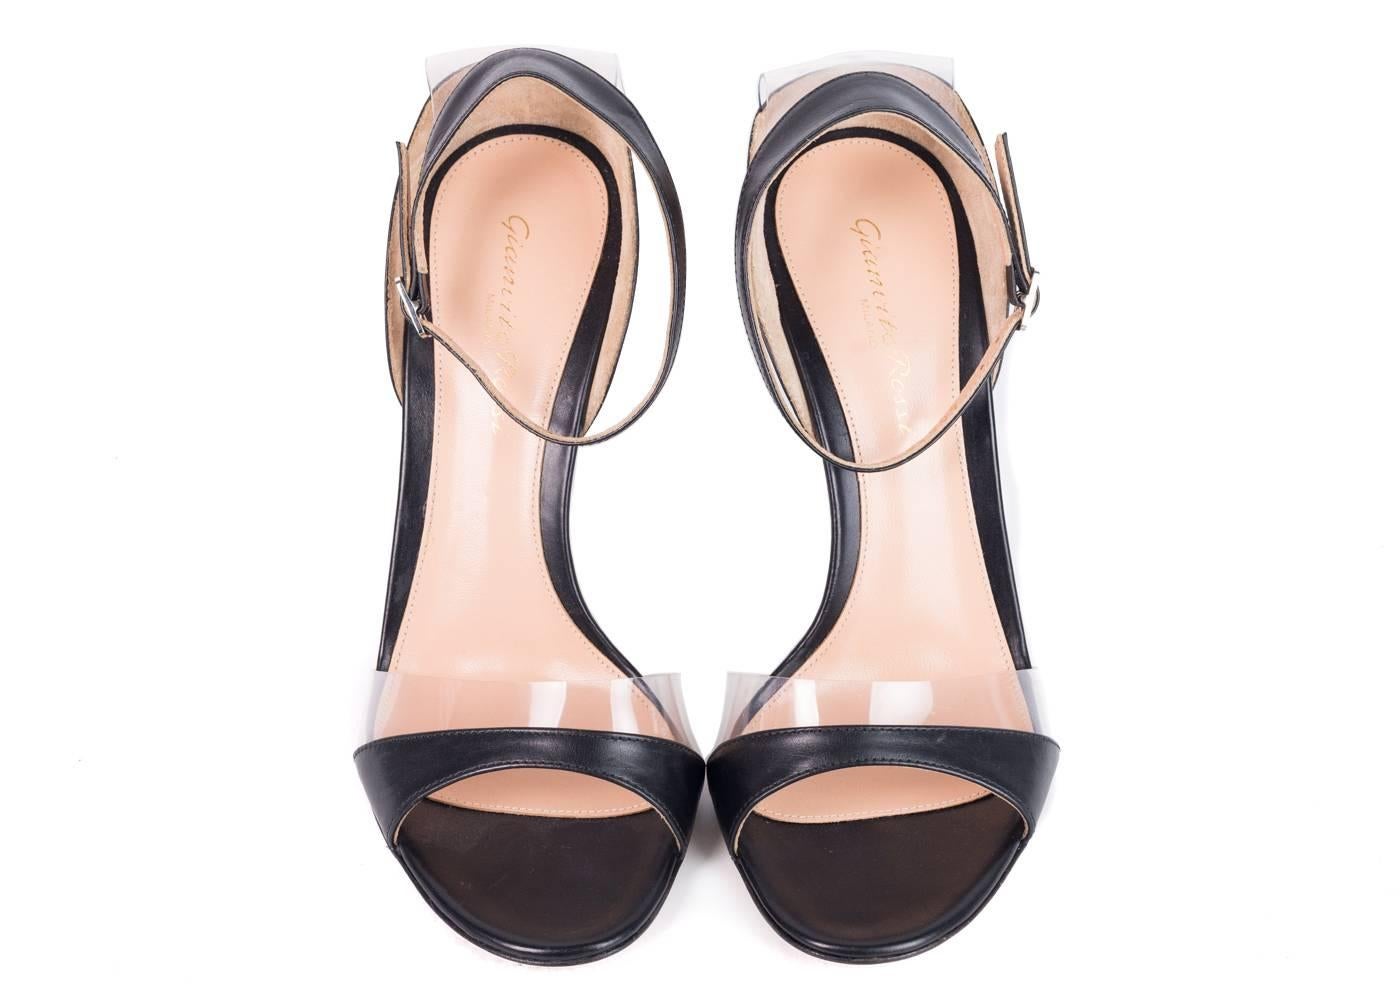 Brand New Gianvito Rossi PVC Trim Sandals
Retails In-Store & Online for $845
Size IT 37 / US 7

Revamp your closet with this ultimate treasure courtesy of Gianvito Rossi. The classic ankle strap sandal has been redefined by the Italian fashion